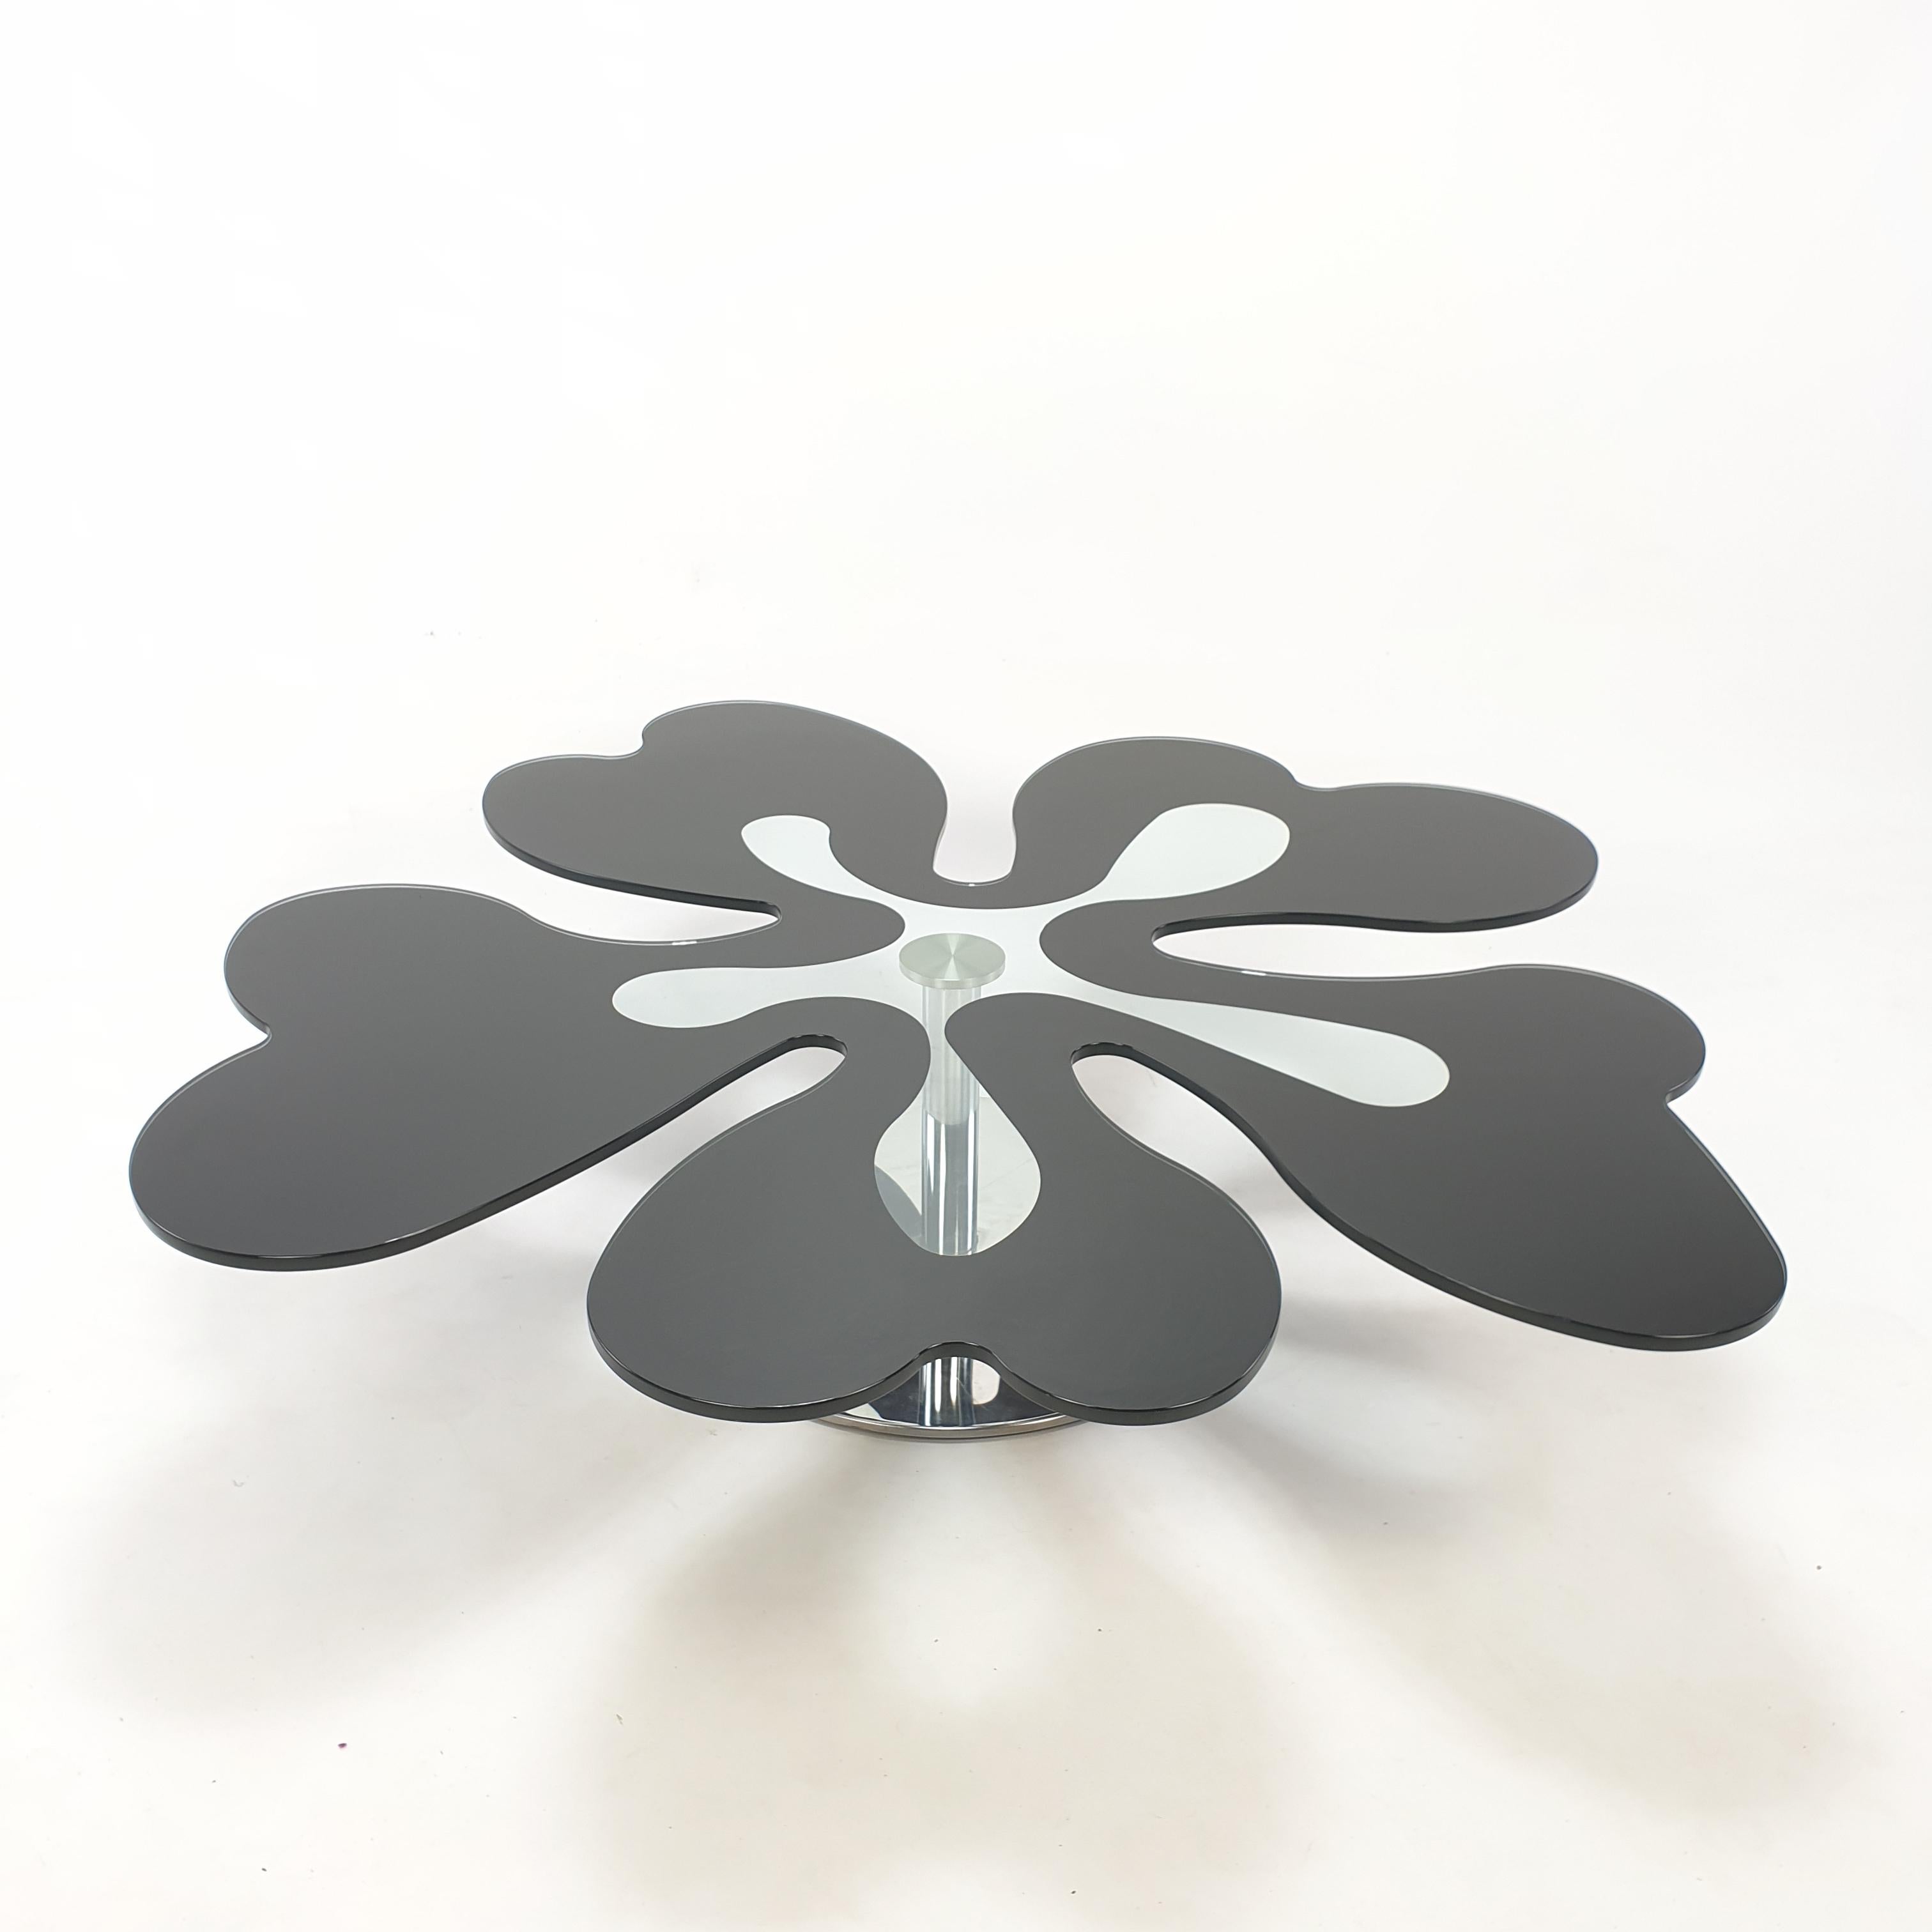 Stunning flowertable, made in Italy in the 80's.

This magical table is made of one piece glass and is well decorated with thin black layer. 

It is turnable on a chromed and solid round foot, so you can use it in more positions.

The foot has